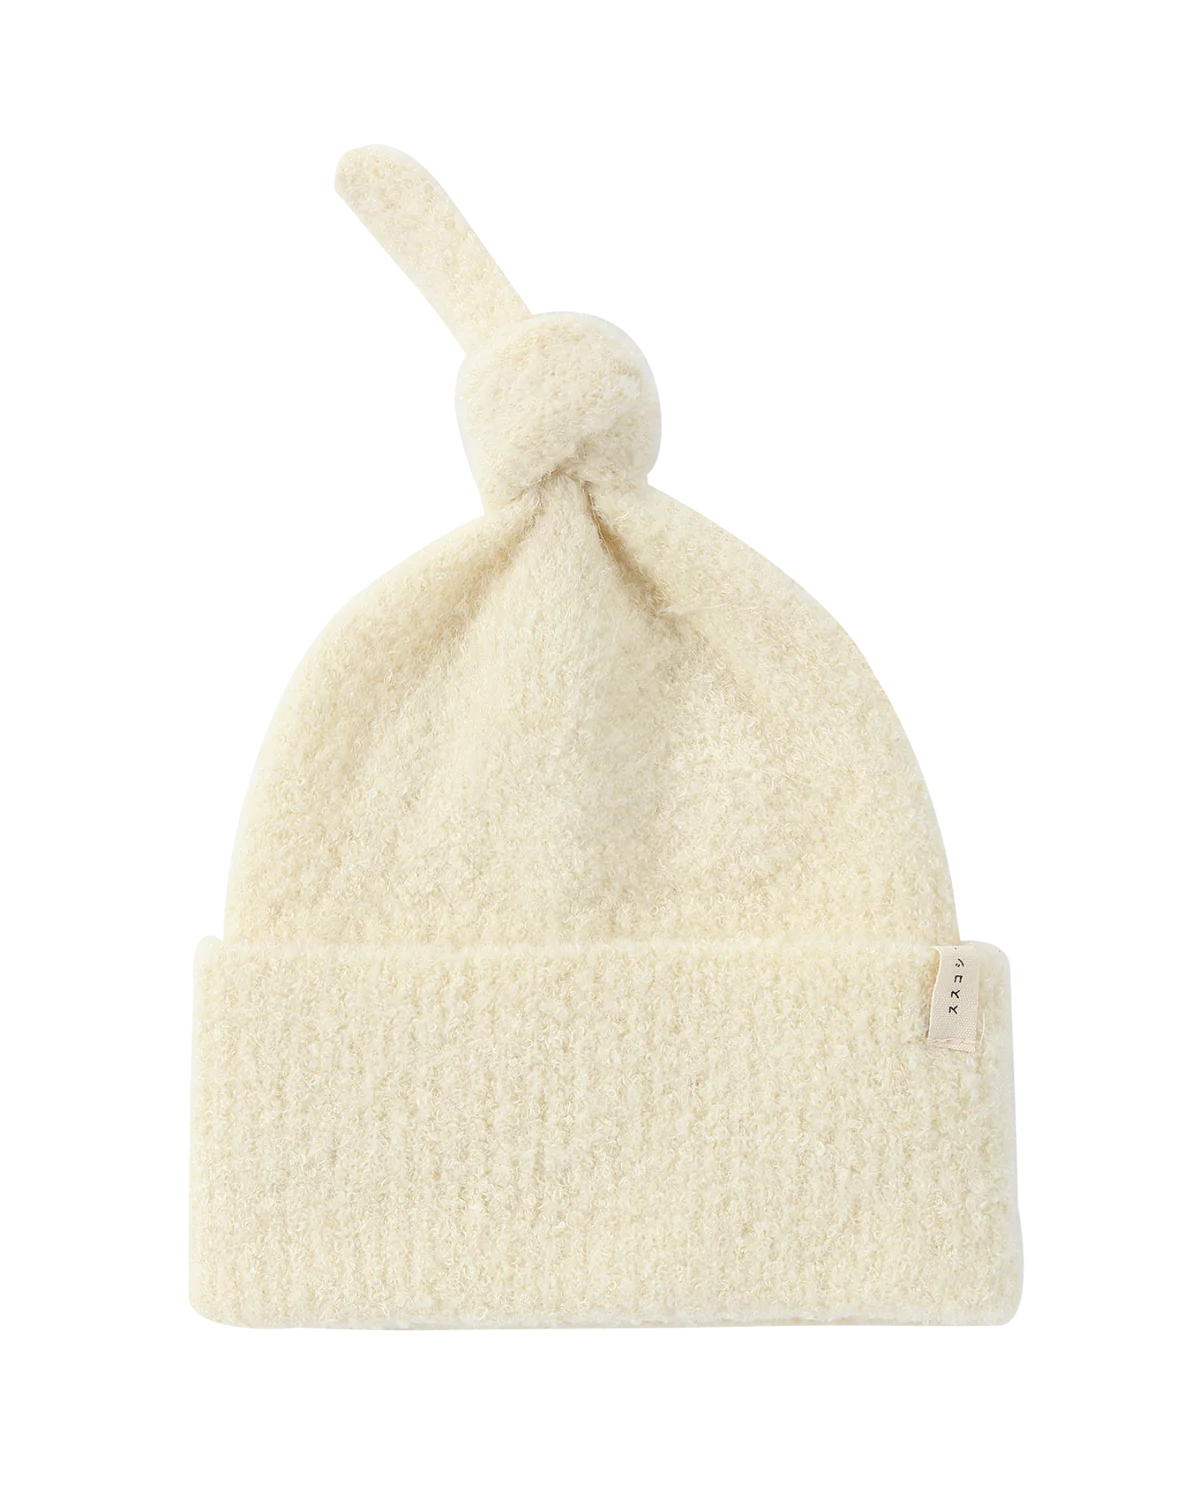 boucle baby knotted hat. milk